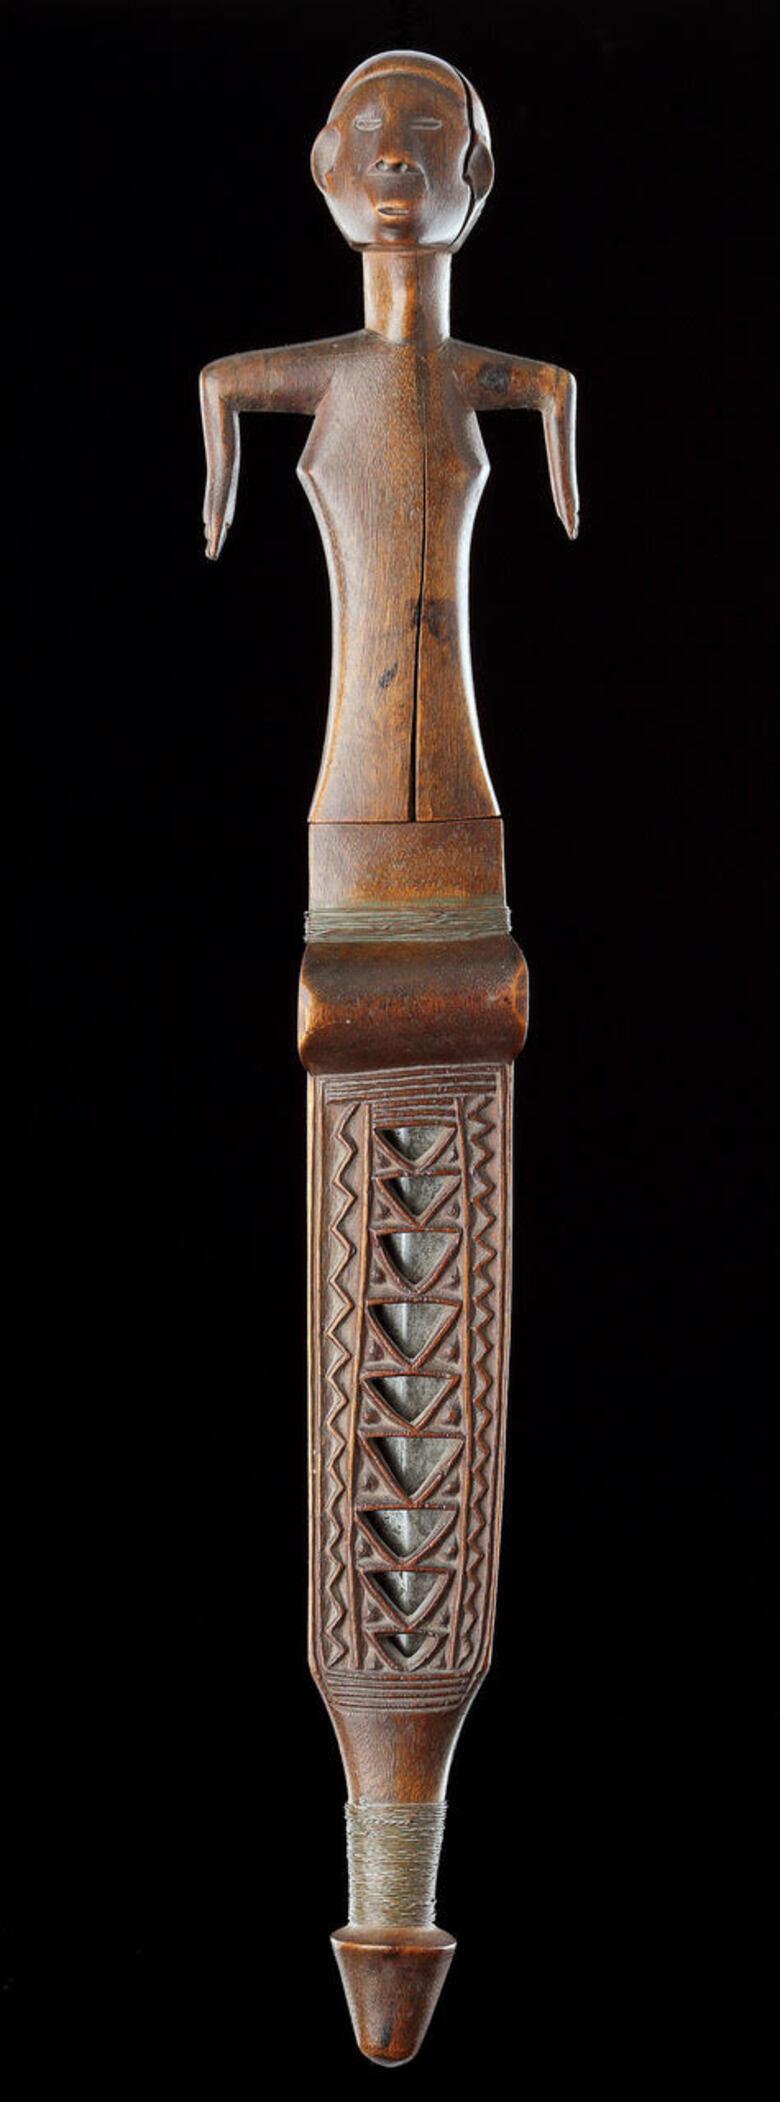 A Fine and Rare Shona Knife and Sheath 

Wood, steel, copper 

Fine colour and patina 

Zimabawe / Africa



19th Century 



Size: 48cm long - 19 ins long (with scabbard) 

42.5cm long, 9cm wide - 16¾ ins long, 3½ ins wide (without) 



Provenance: